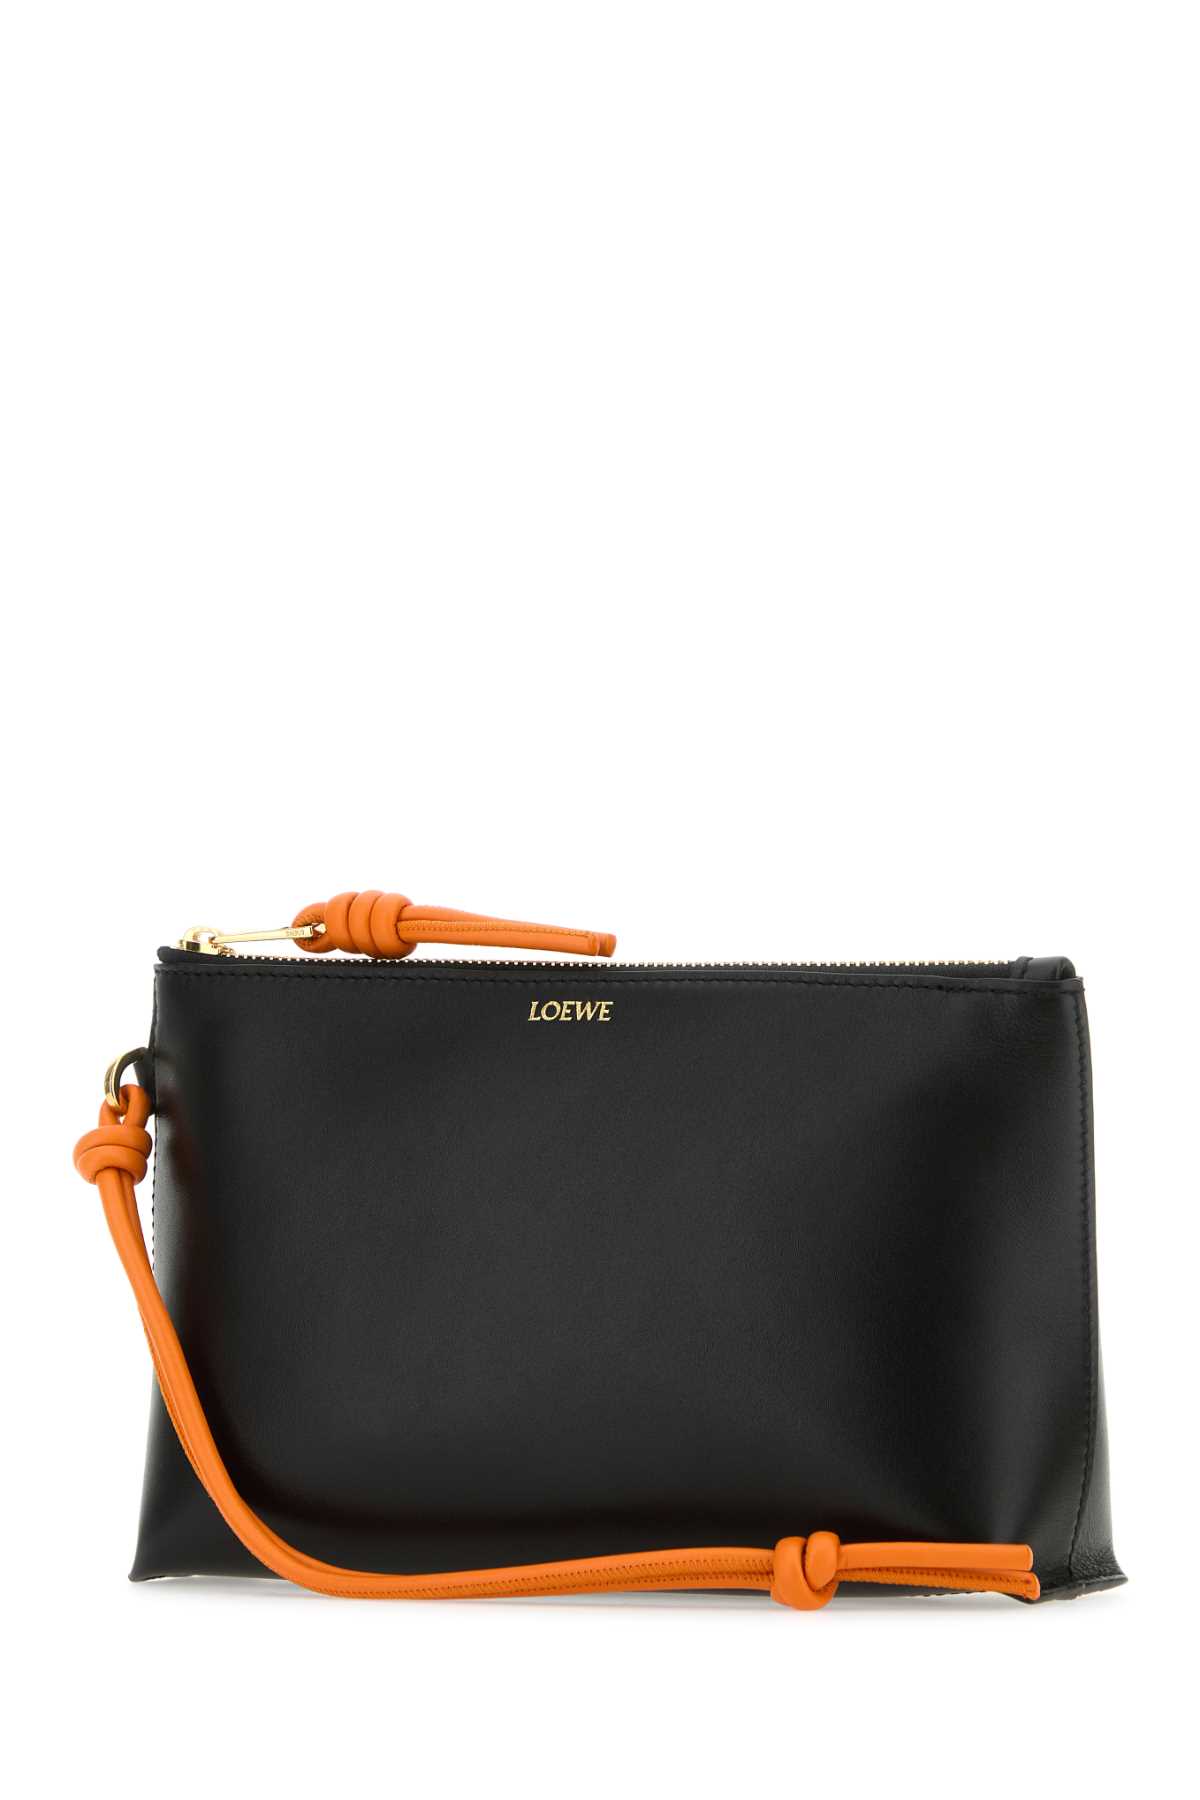 LOEWE BLACK NAPPA LEATHER KNOT T POUCH